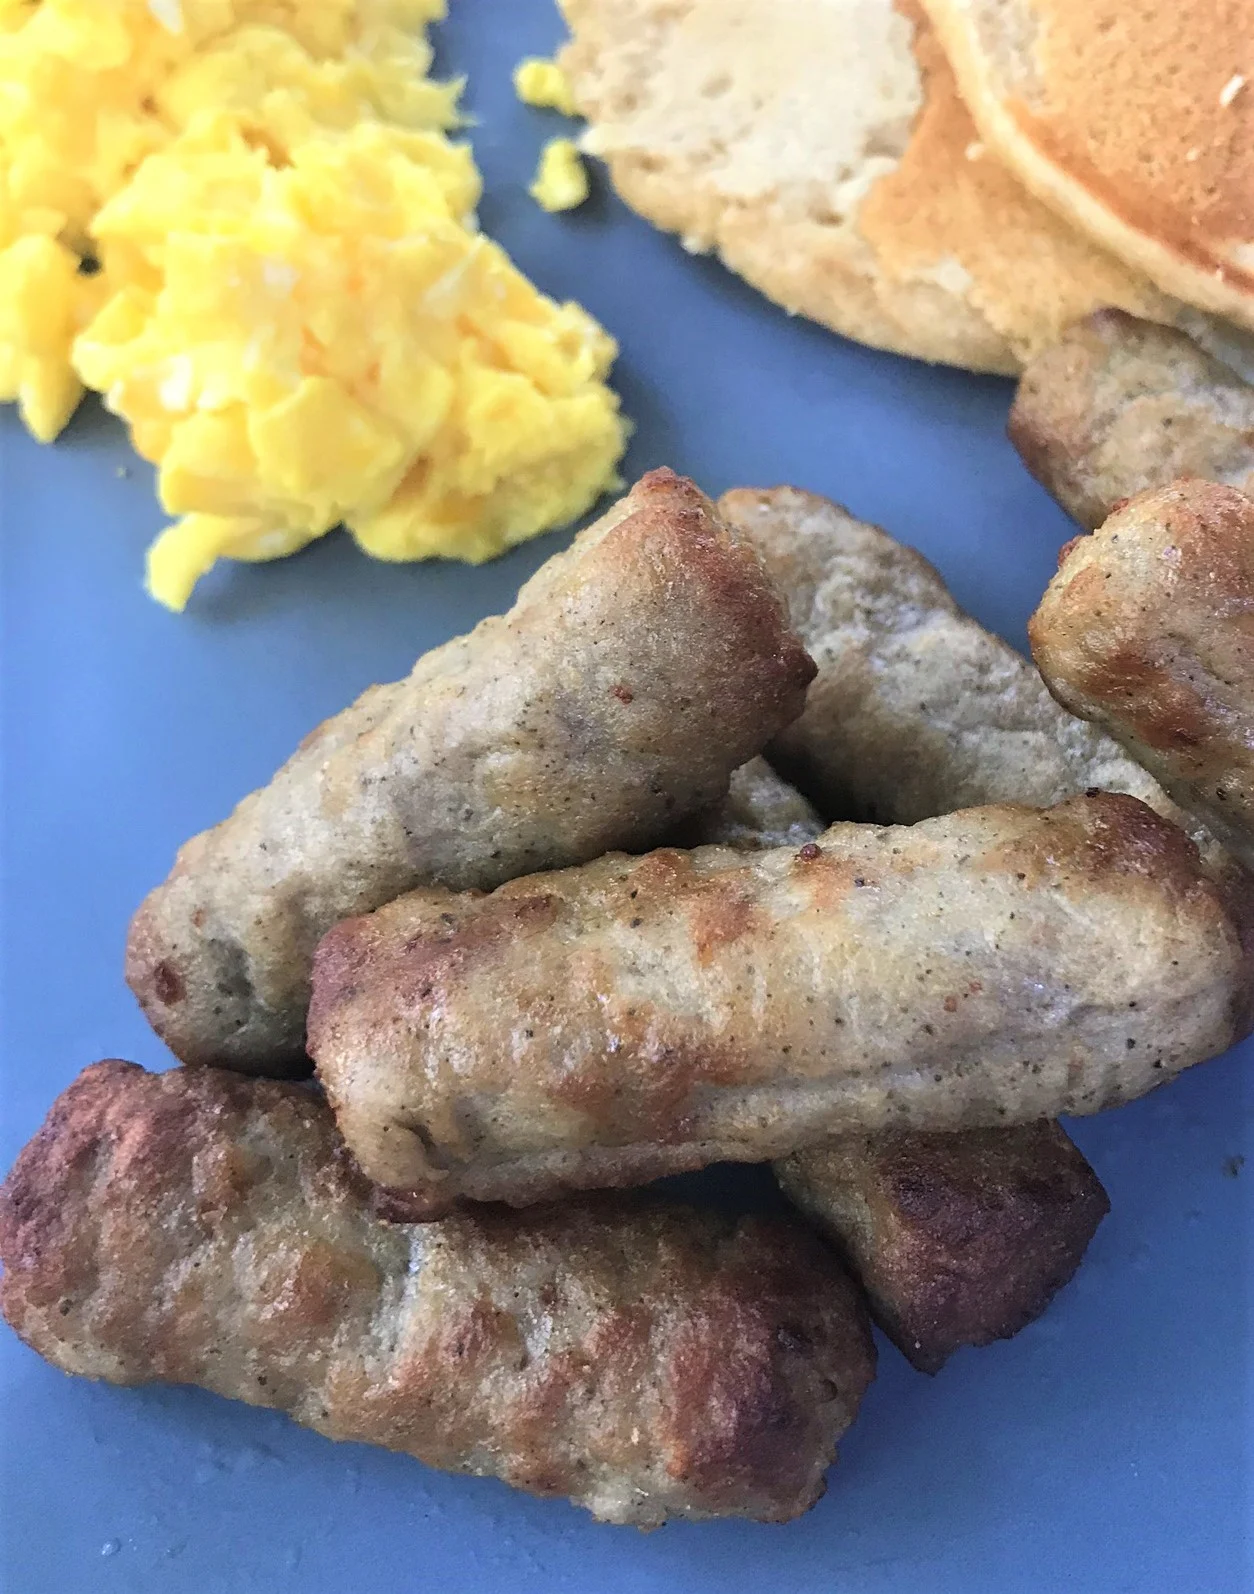 cooked breakfast sausage on a plate